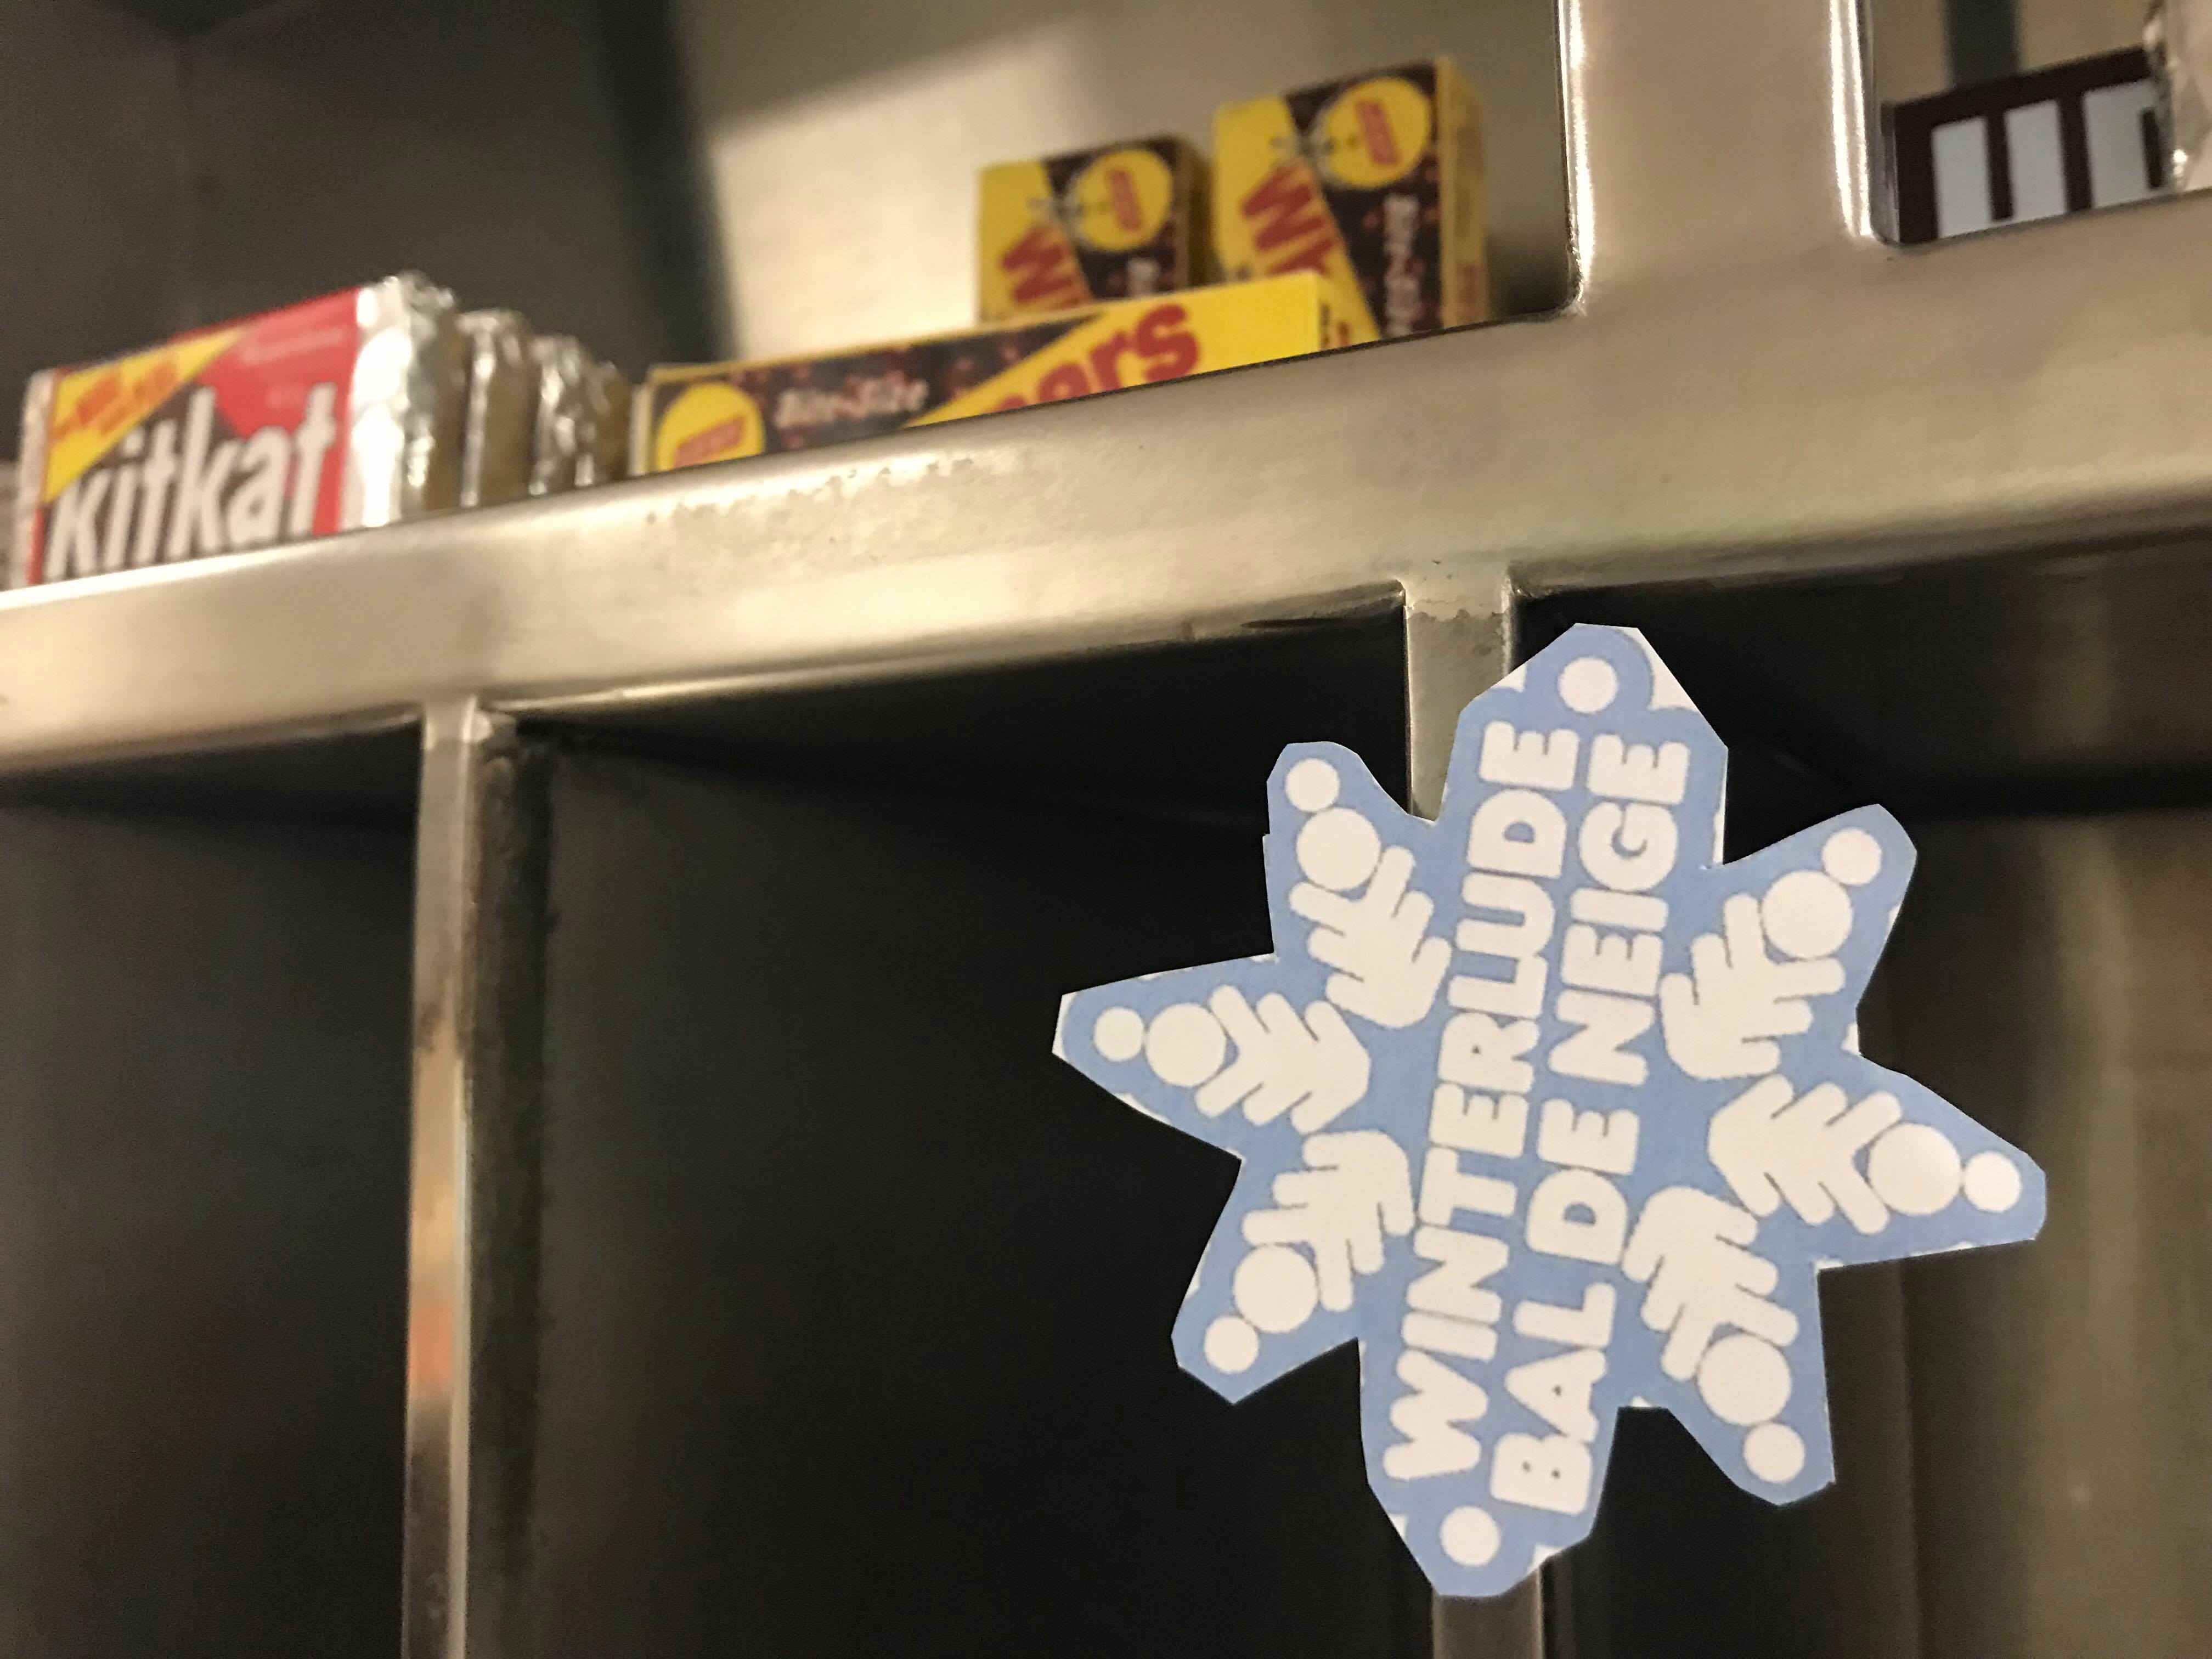 Winterlude snowflake sticker adhered to a shelf in the CANEX.